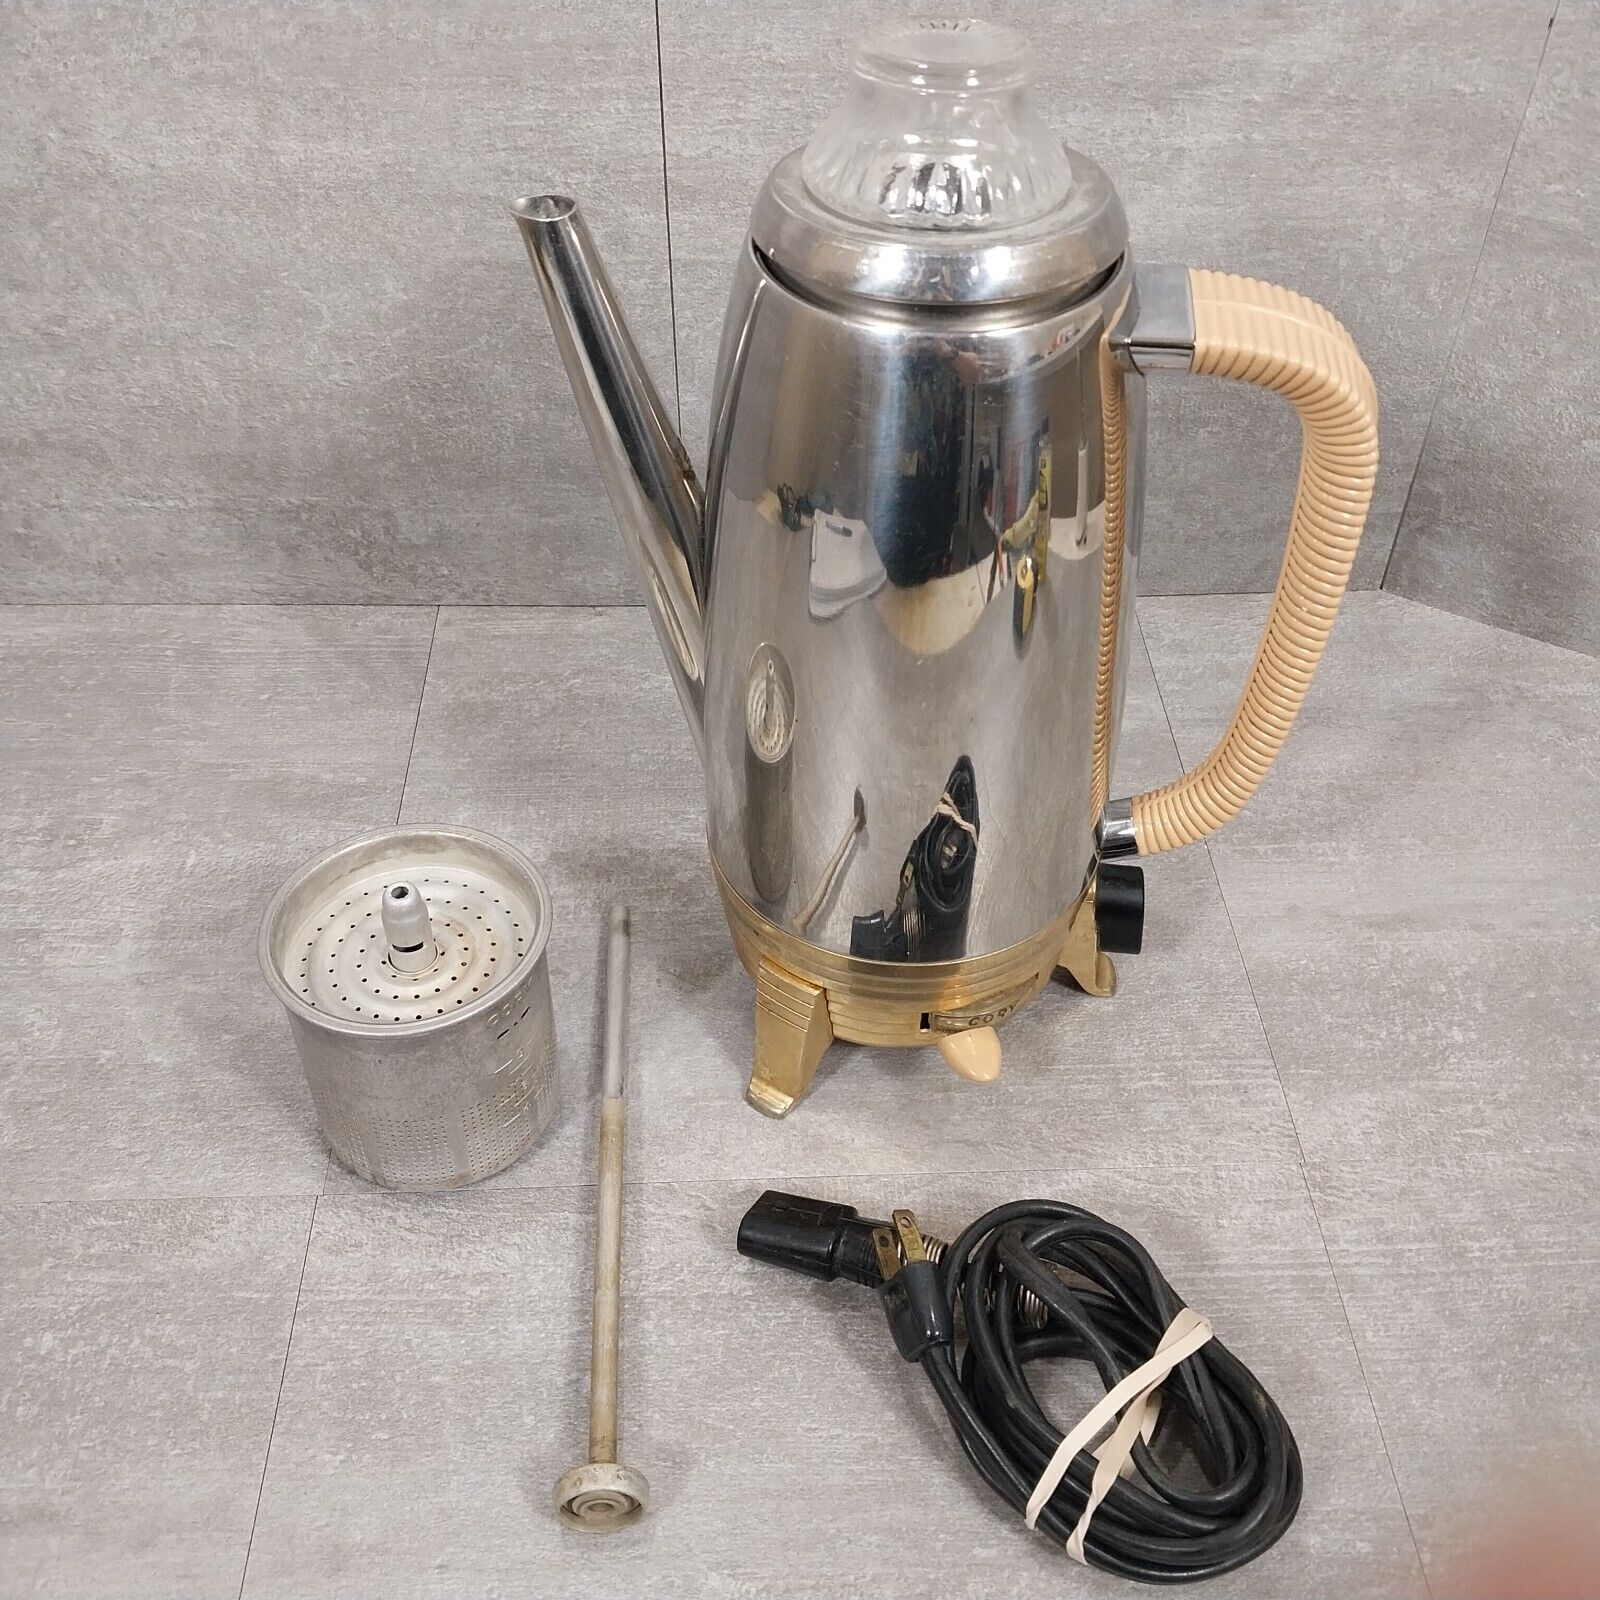 Vintage 1950s MCM 2 Tone Cory DAP Stainless Steel Electric Percolator Gold Base